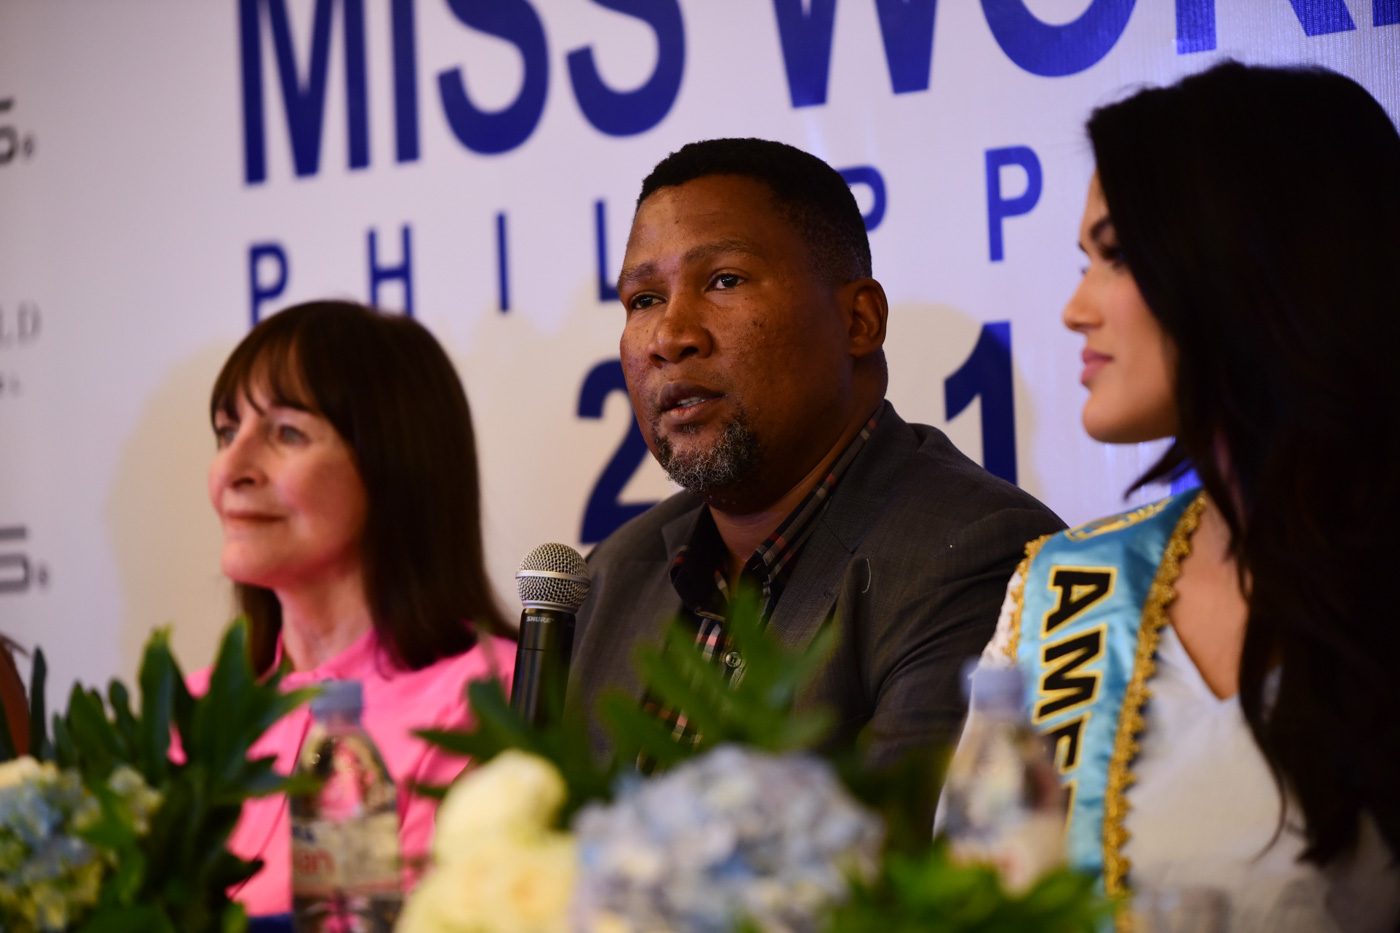 Chief Mandela answering questions from the media during the Miss World press conference on September 1.  